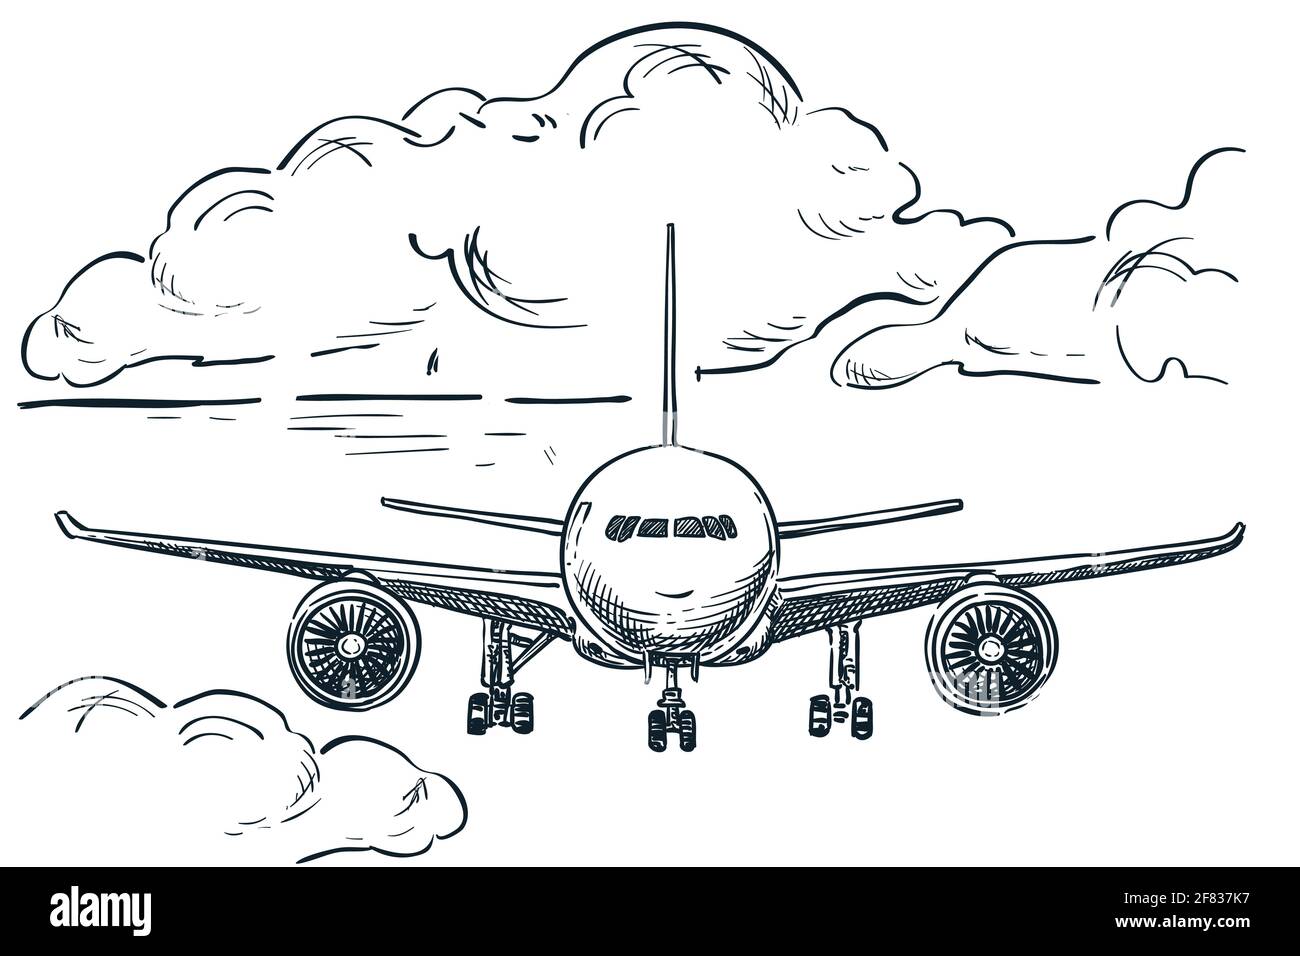 Plane flies in sky, hand drawn vector sketch illustration. Air flight drawing background. Tourism, travel and vacation isolated design elements Stock Vector